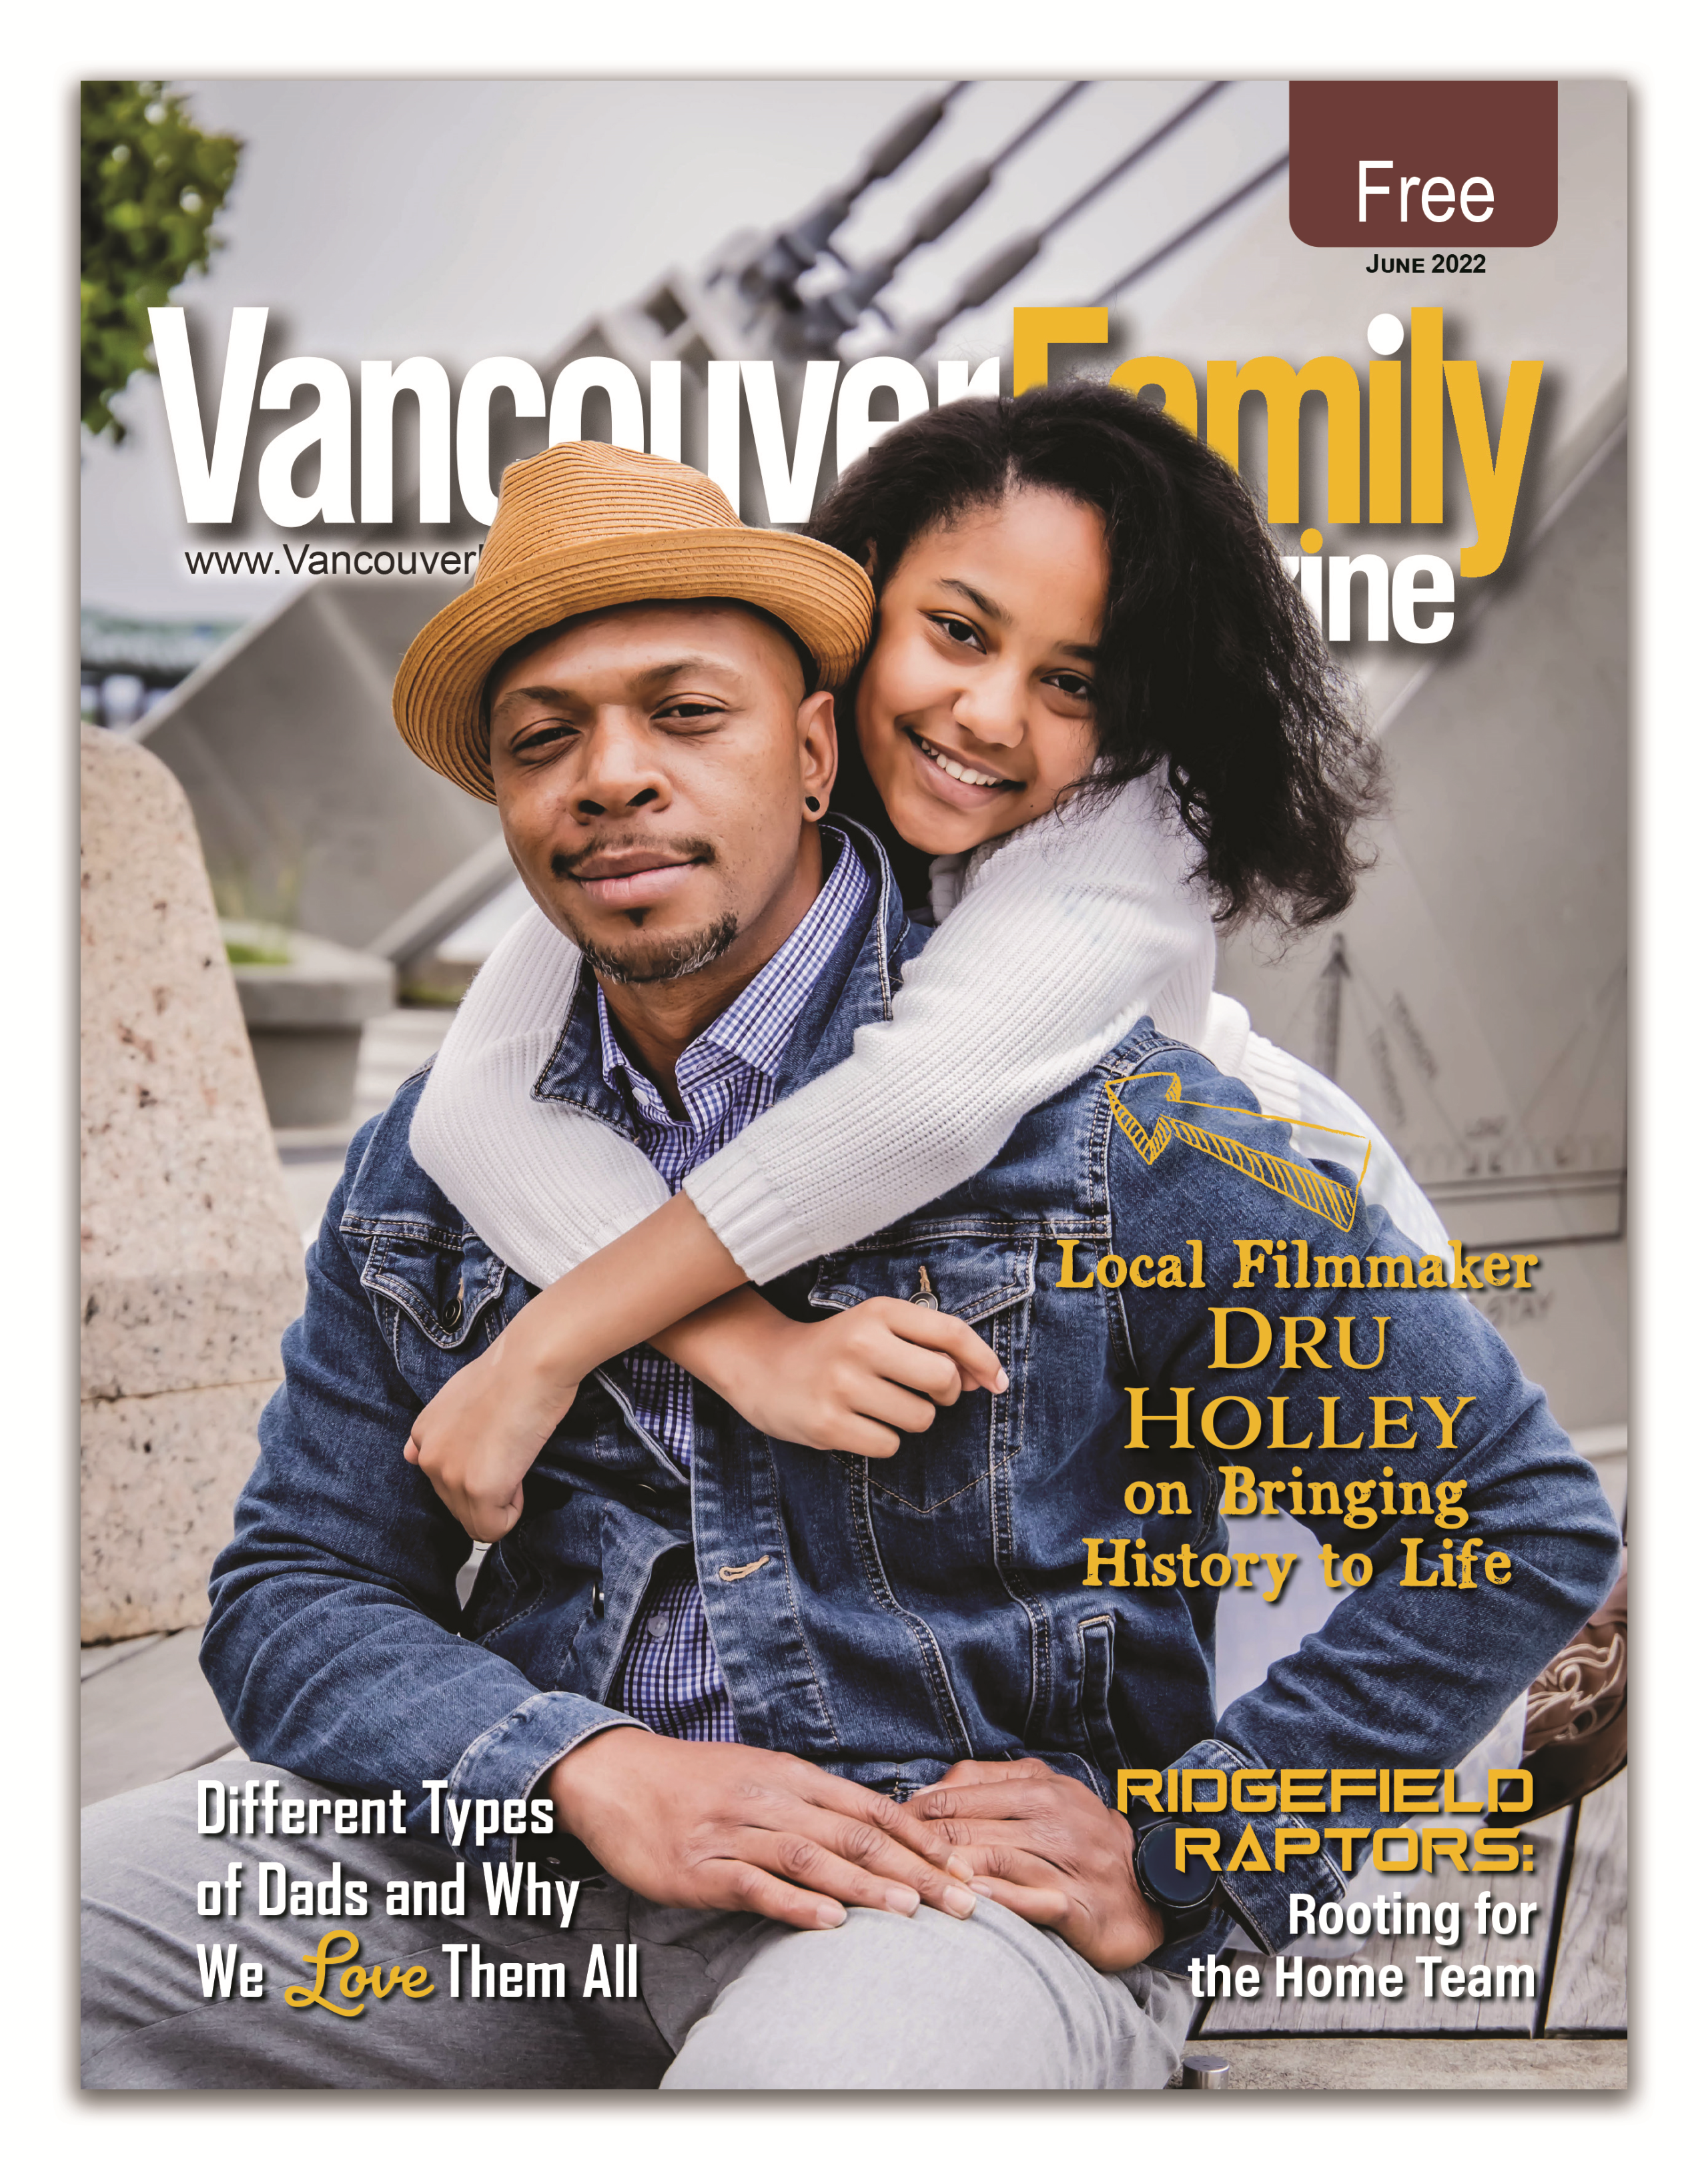 Vancouver Family Magazine's June 2022 issue features a Black father (Dru Holley) with his daughter with the Grant Street Pier in the background